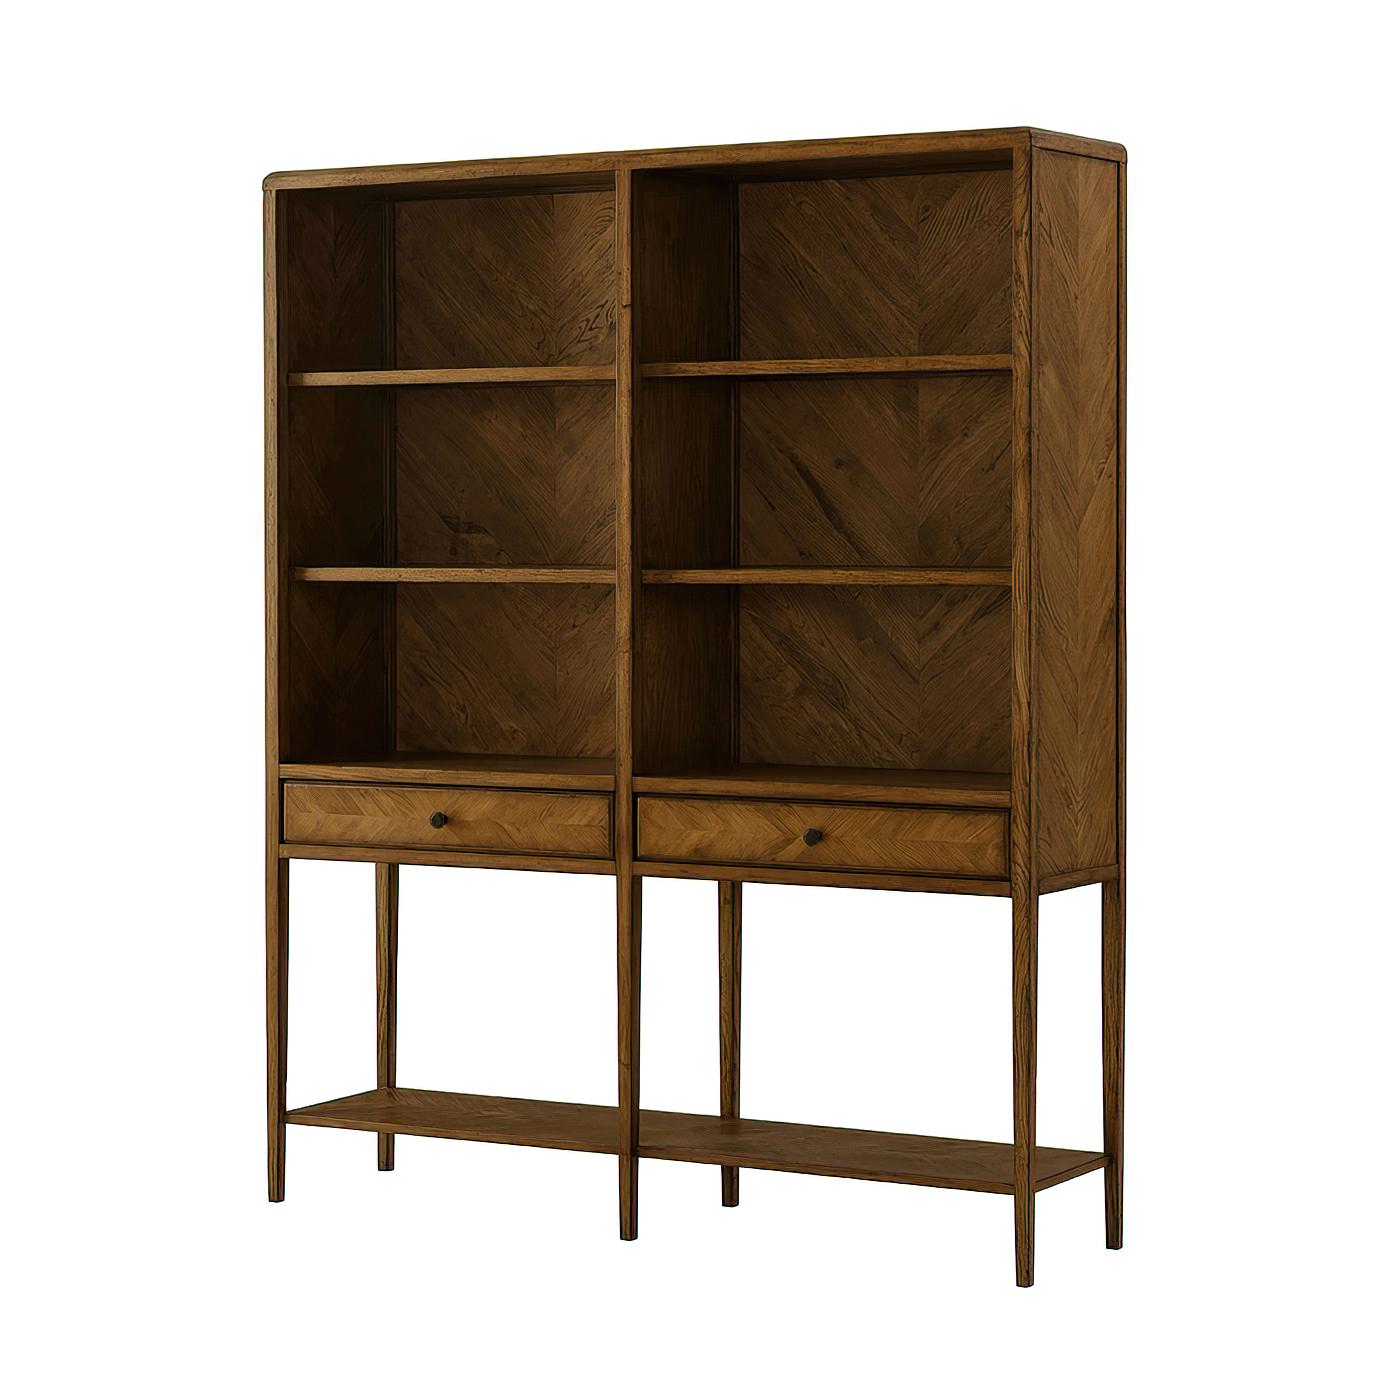 An oak parquetry open bookcase with tapered legs. It has a beautiful herringbone oak parquetry on the back panel and hand-crafted veneered shelves. It has two frieze drawers and Verde Bronze finished handles. 

Shown in Dusk